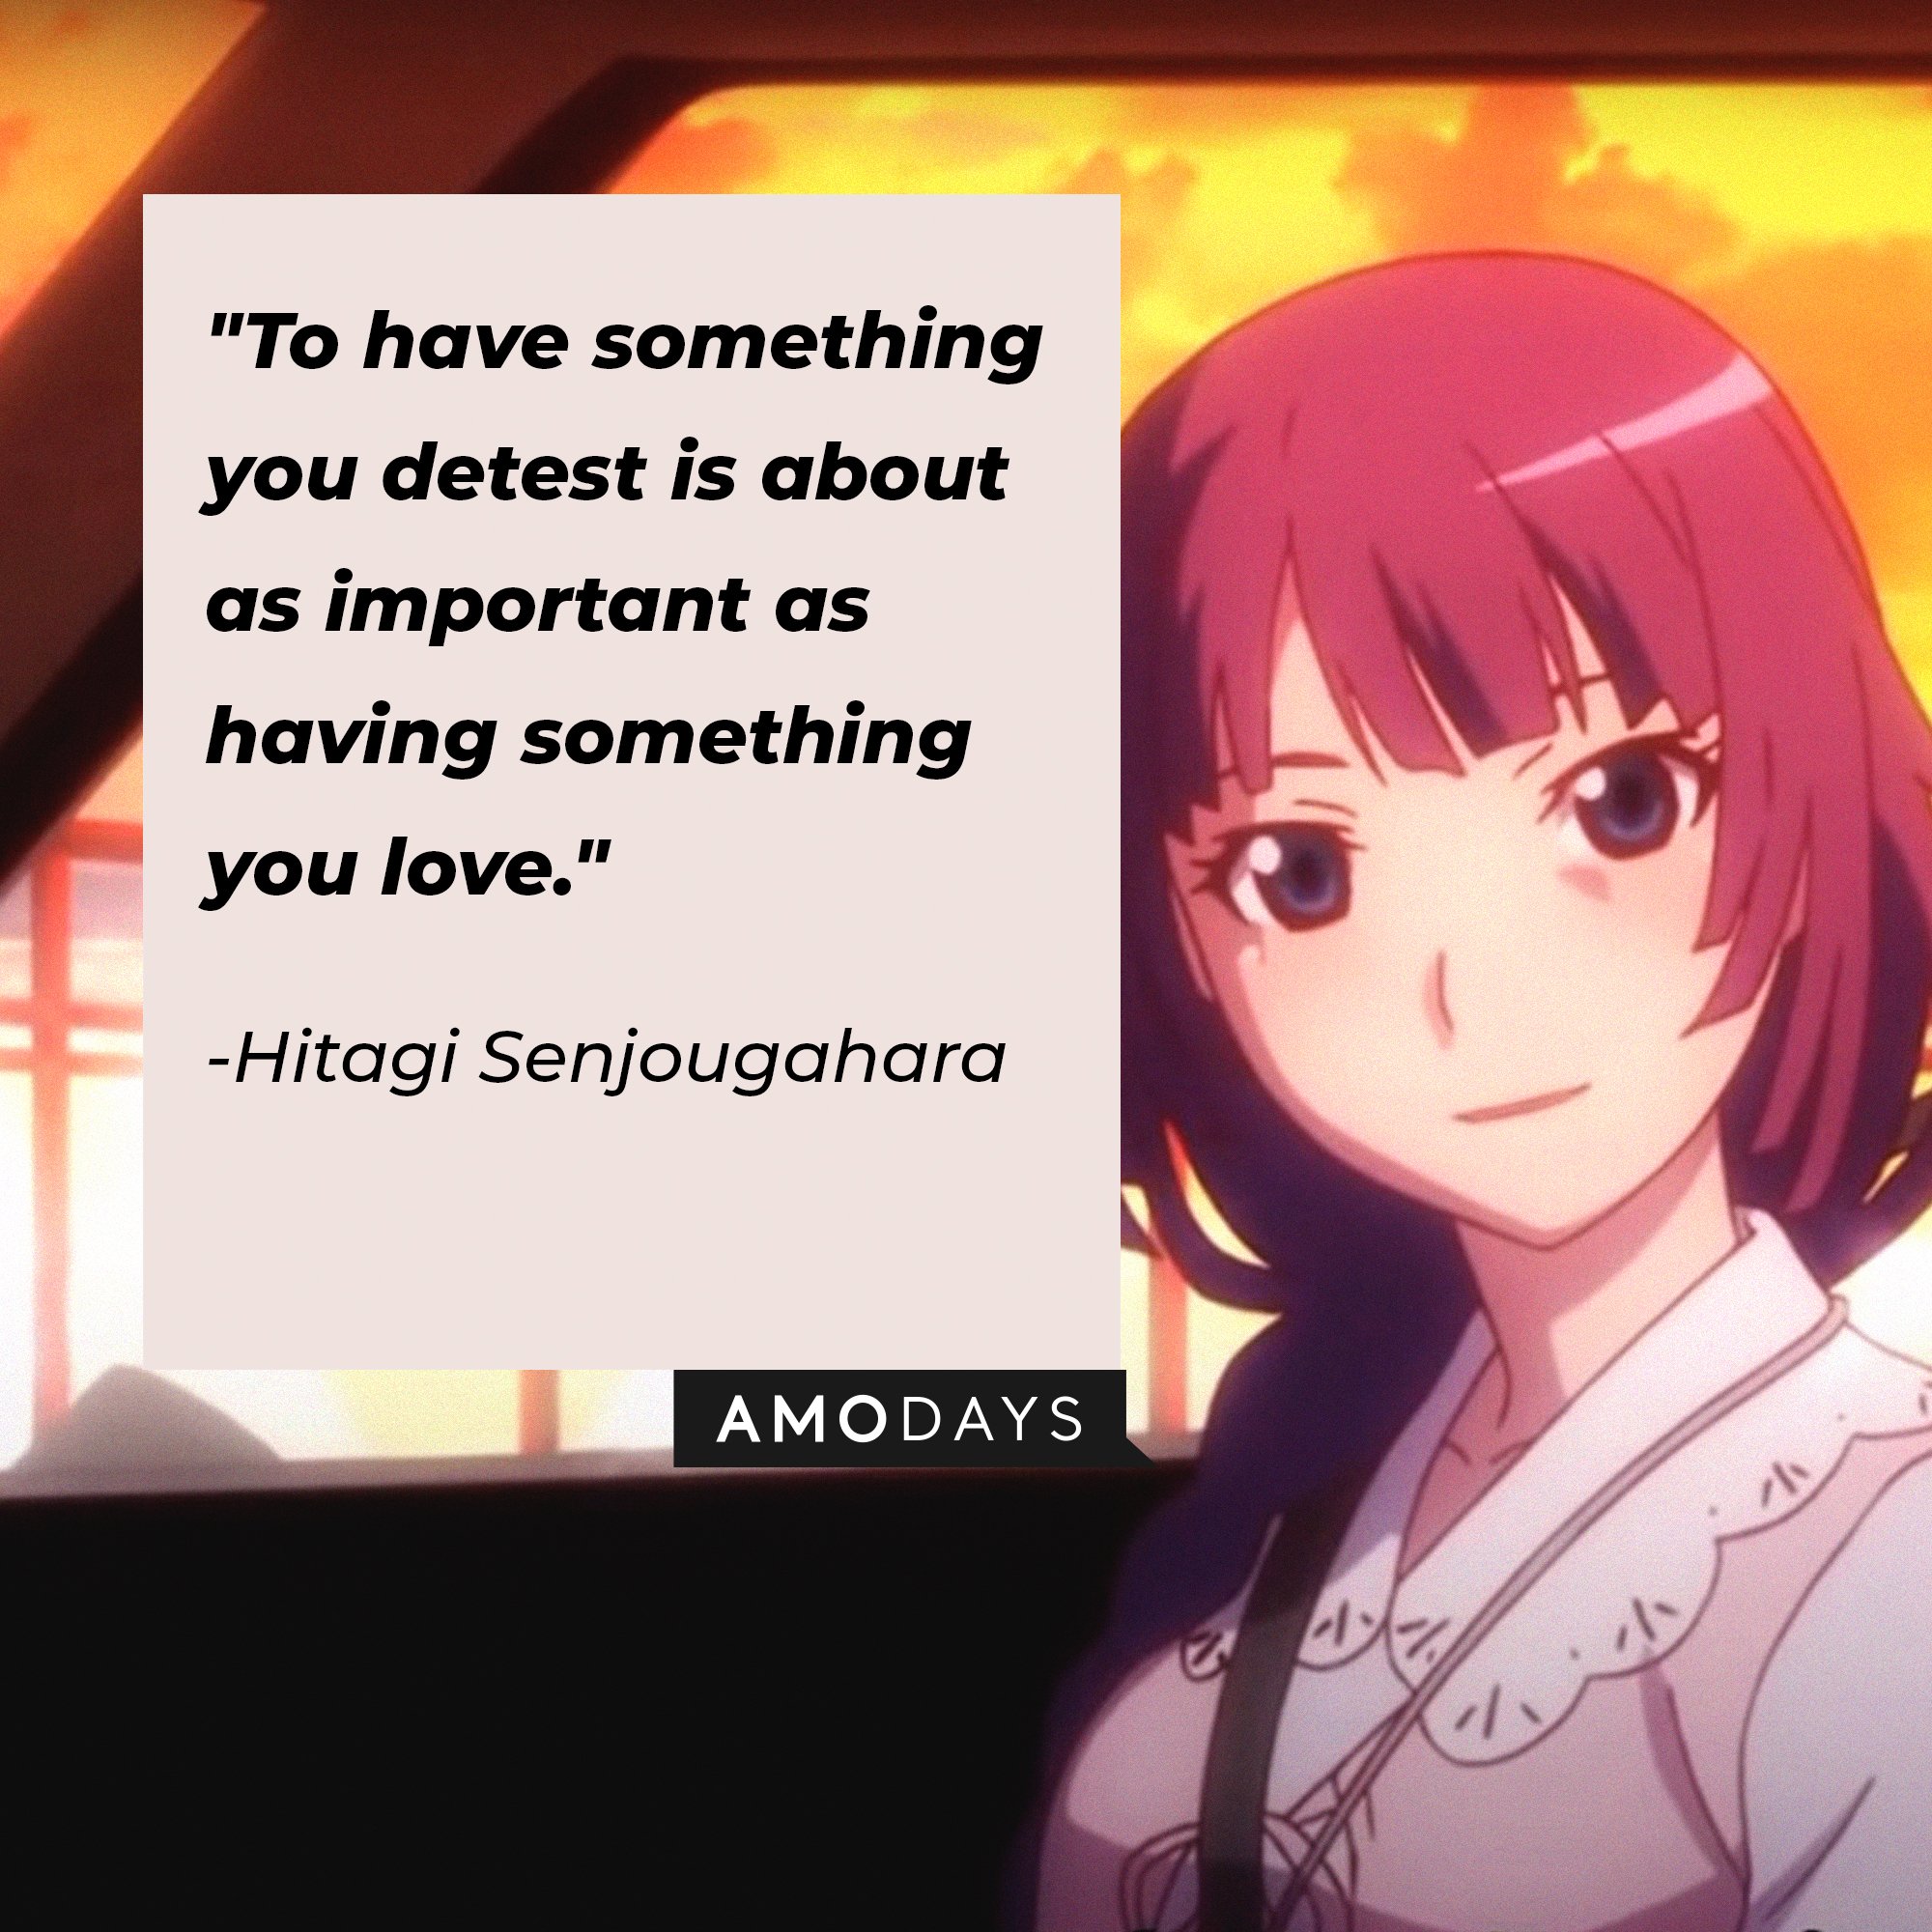 Hitagi Senjougahara’s quote: "To have something you detest is about as important as having something you love." | Image: AmoDays 